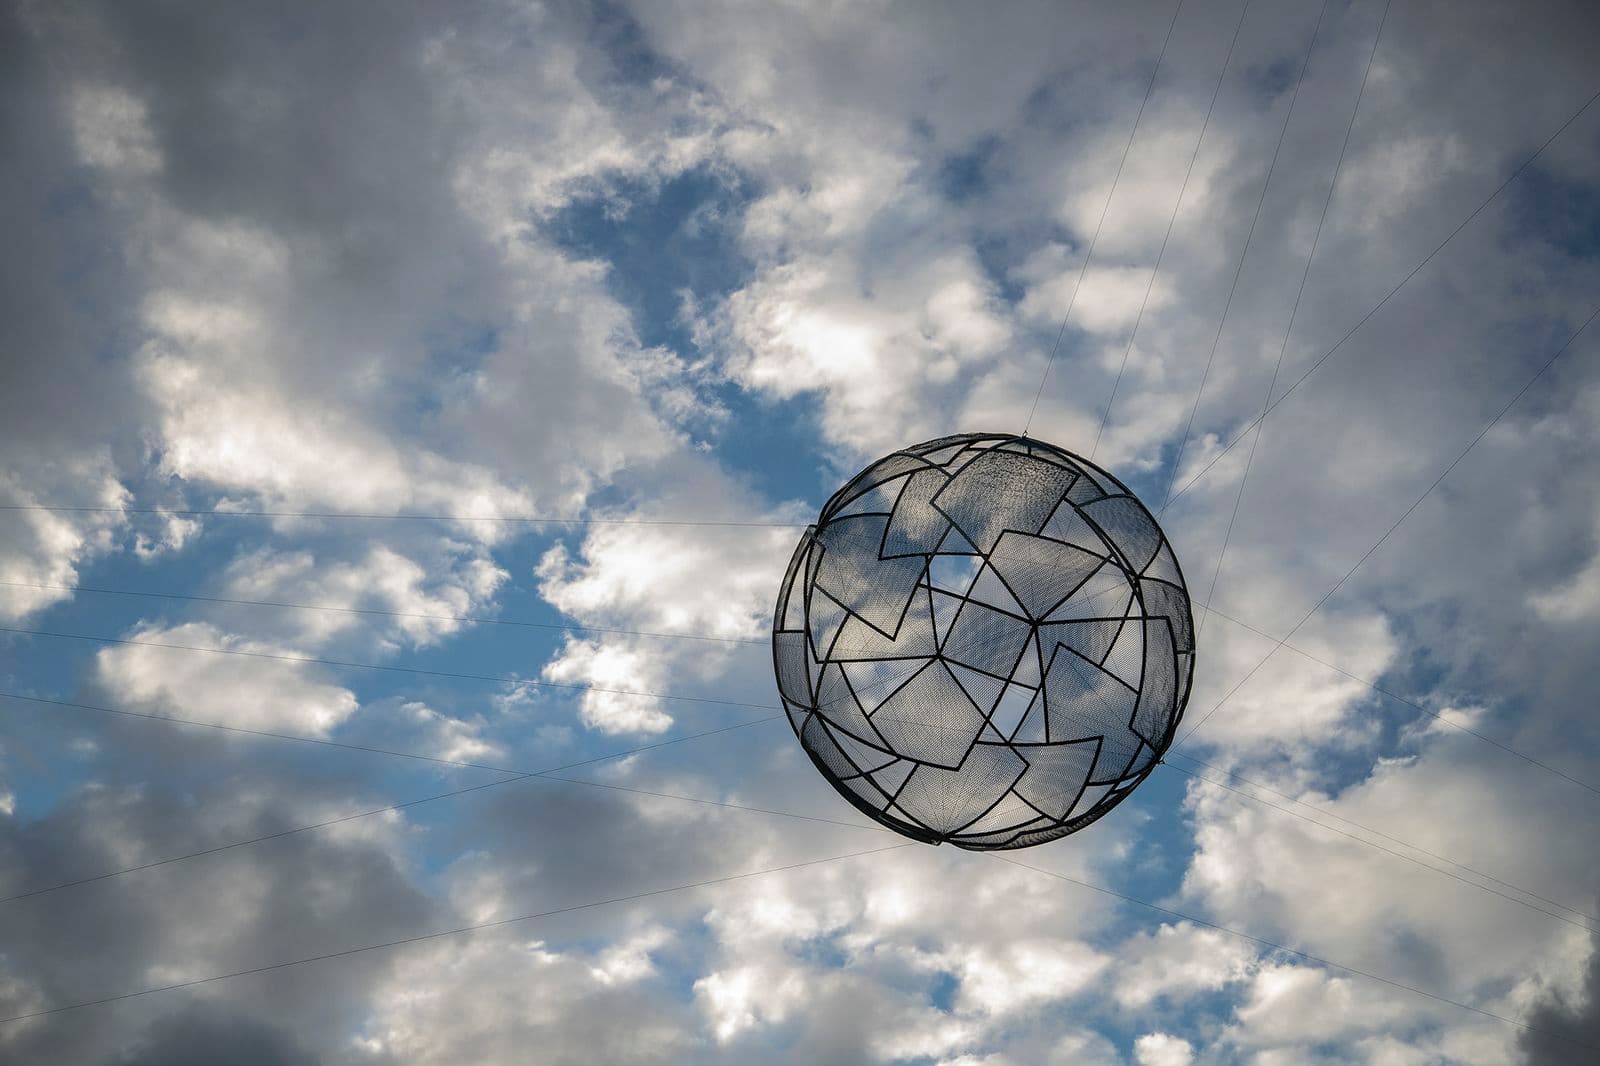 A sphere made of interlocking geometric shapes hangs in the sky